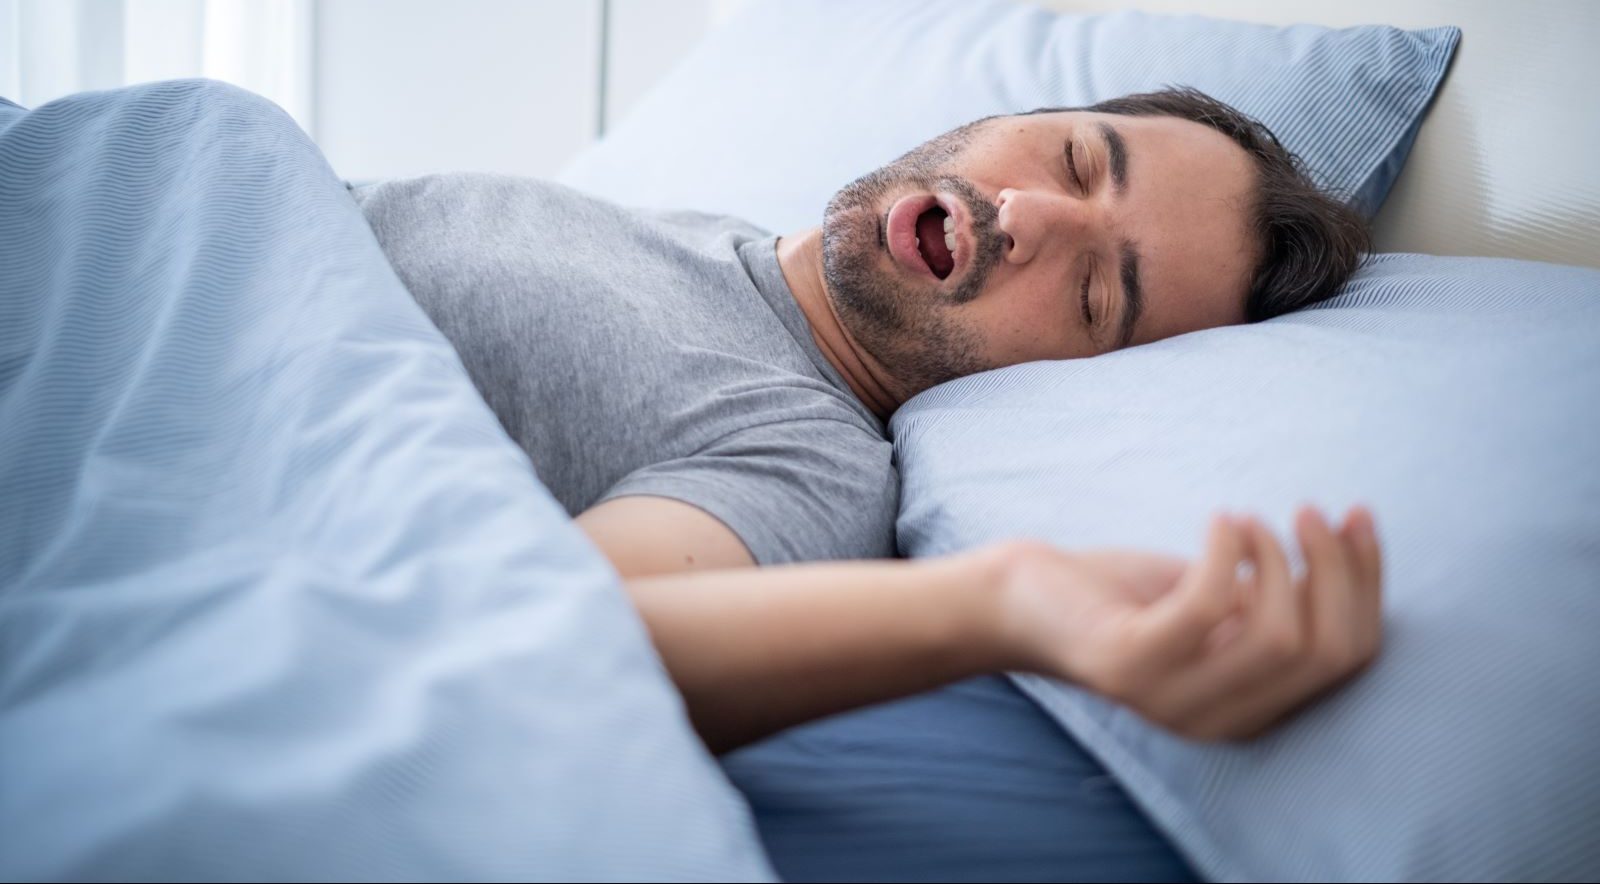 A pulmonologist offers five simple fixes to prevent snoring, including risk factors to look out for and at-home treatments.